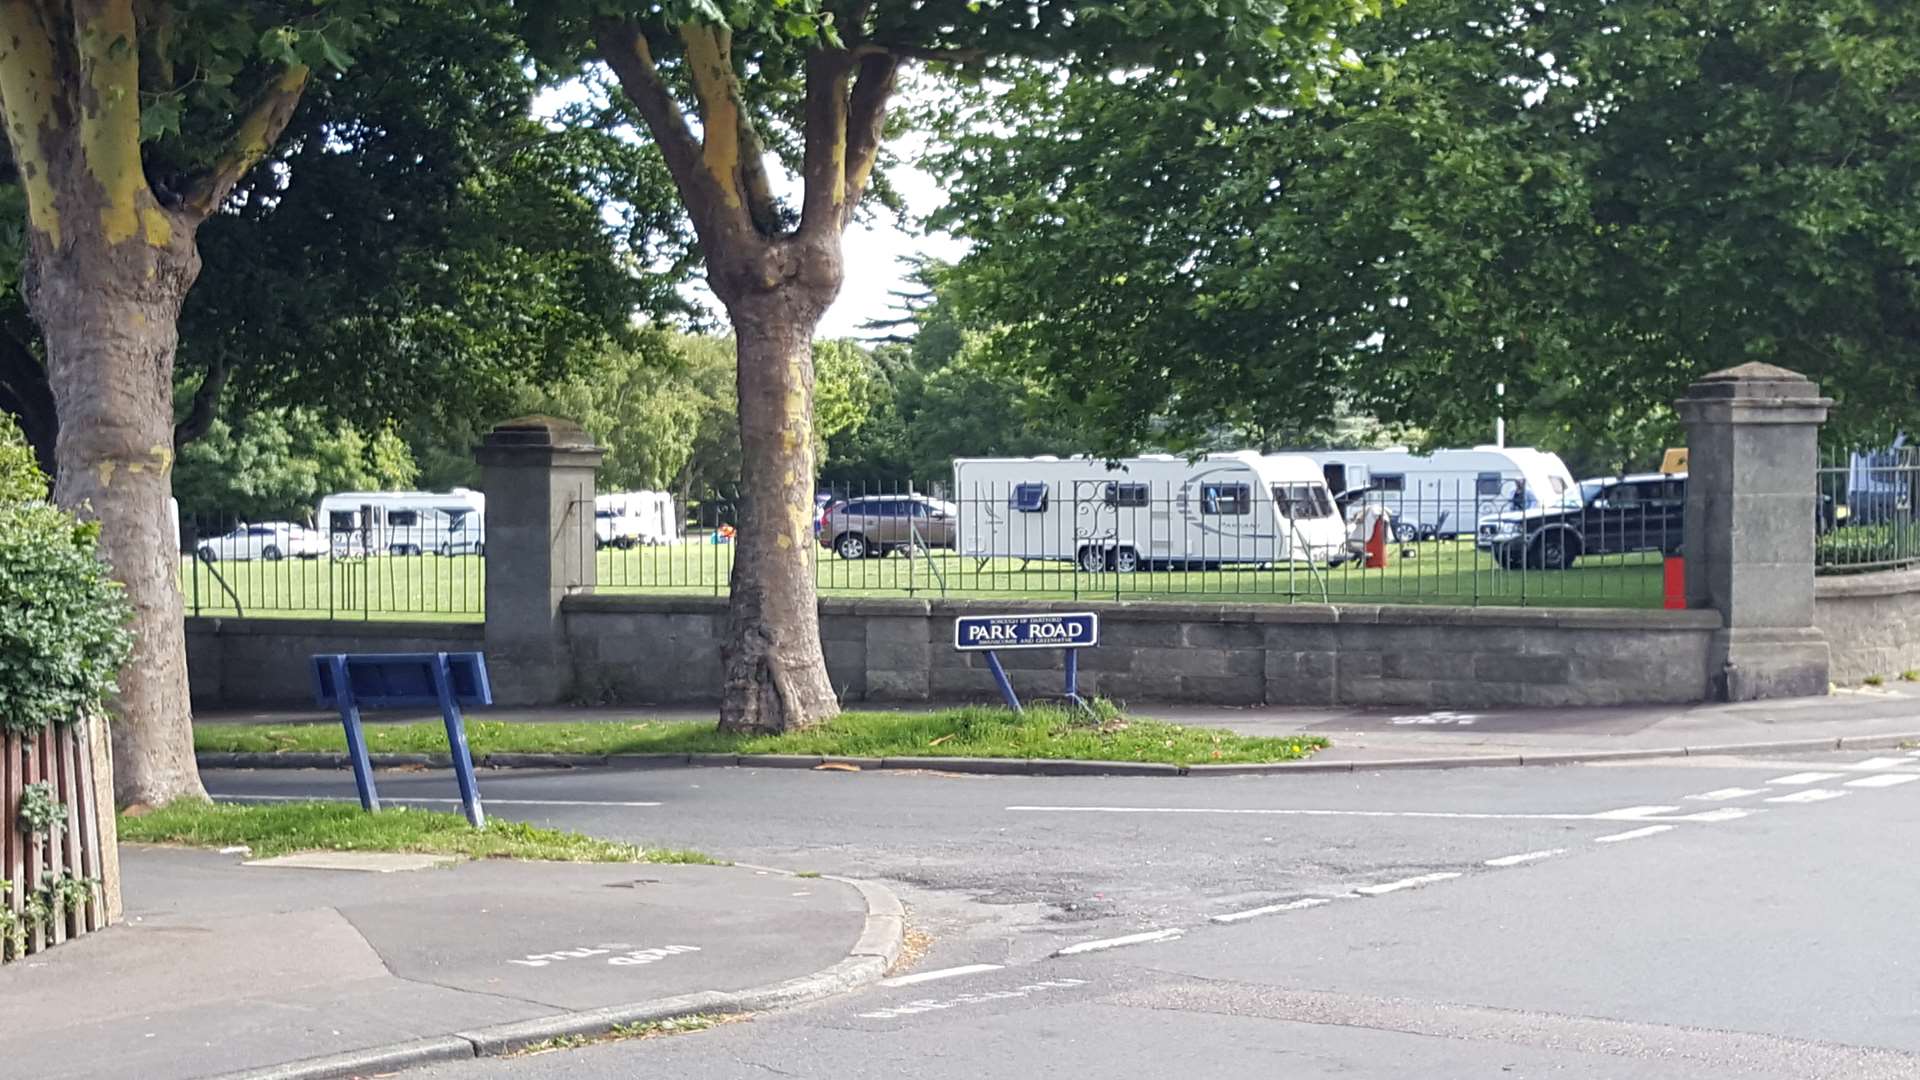 The travellers have set up home at Swanscombe Park.